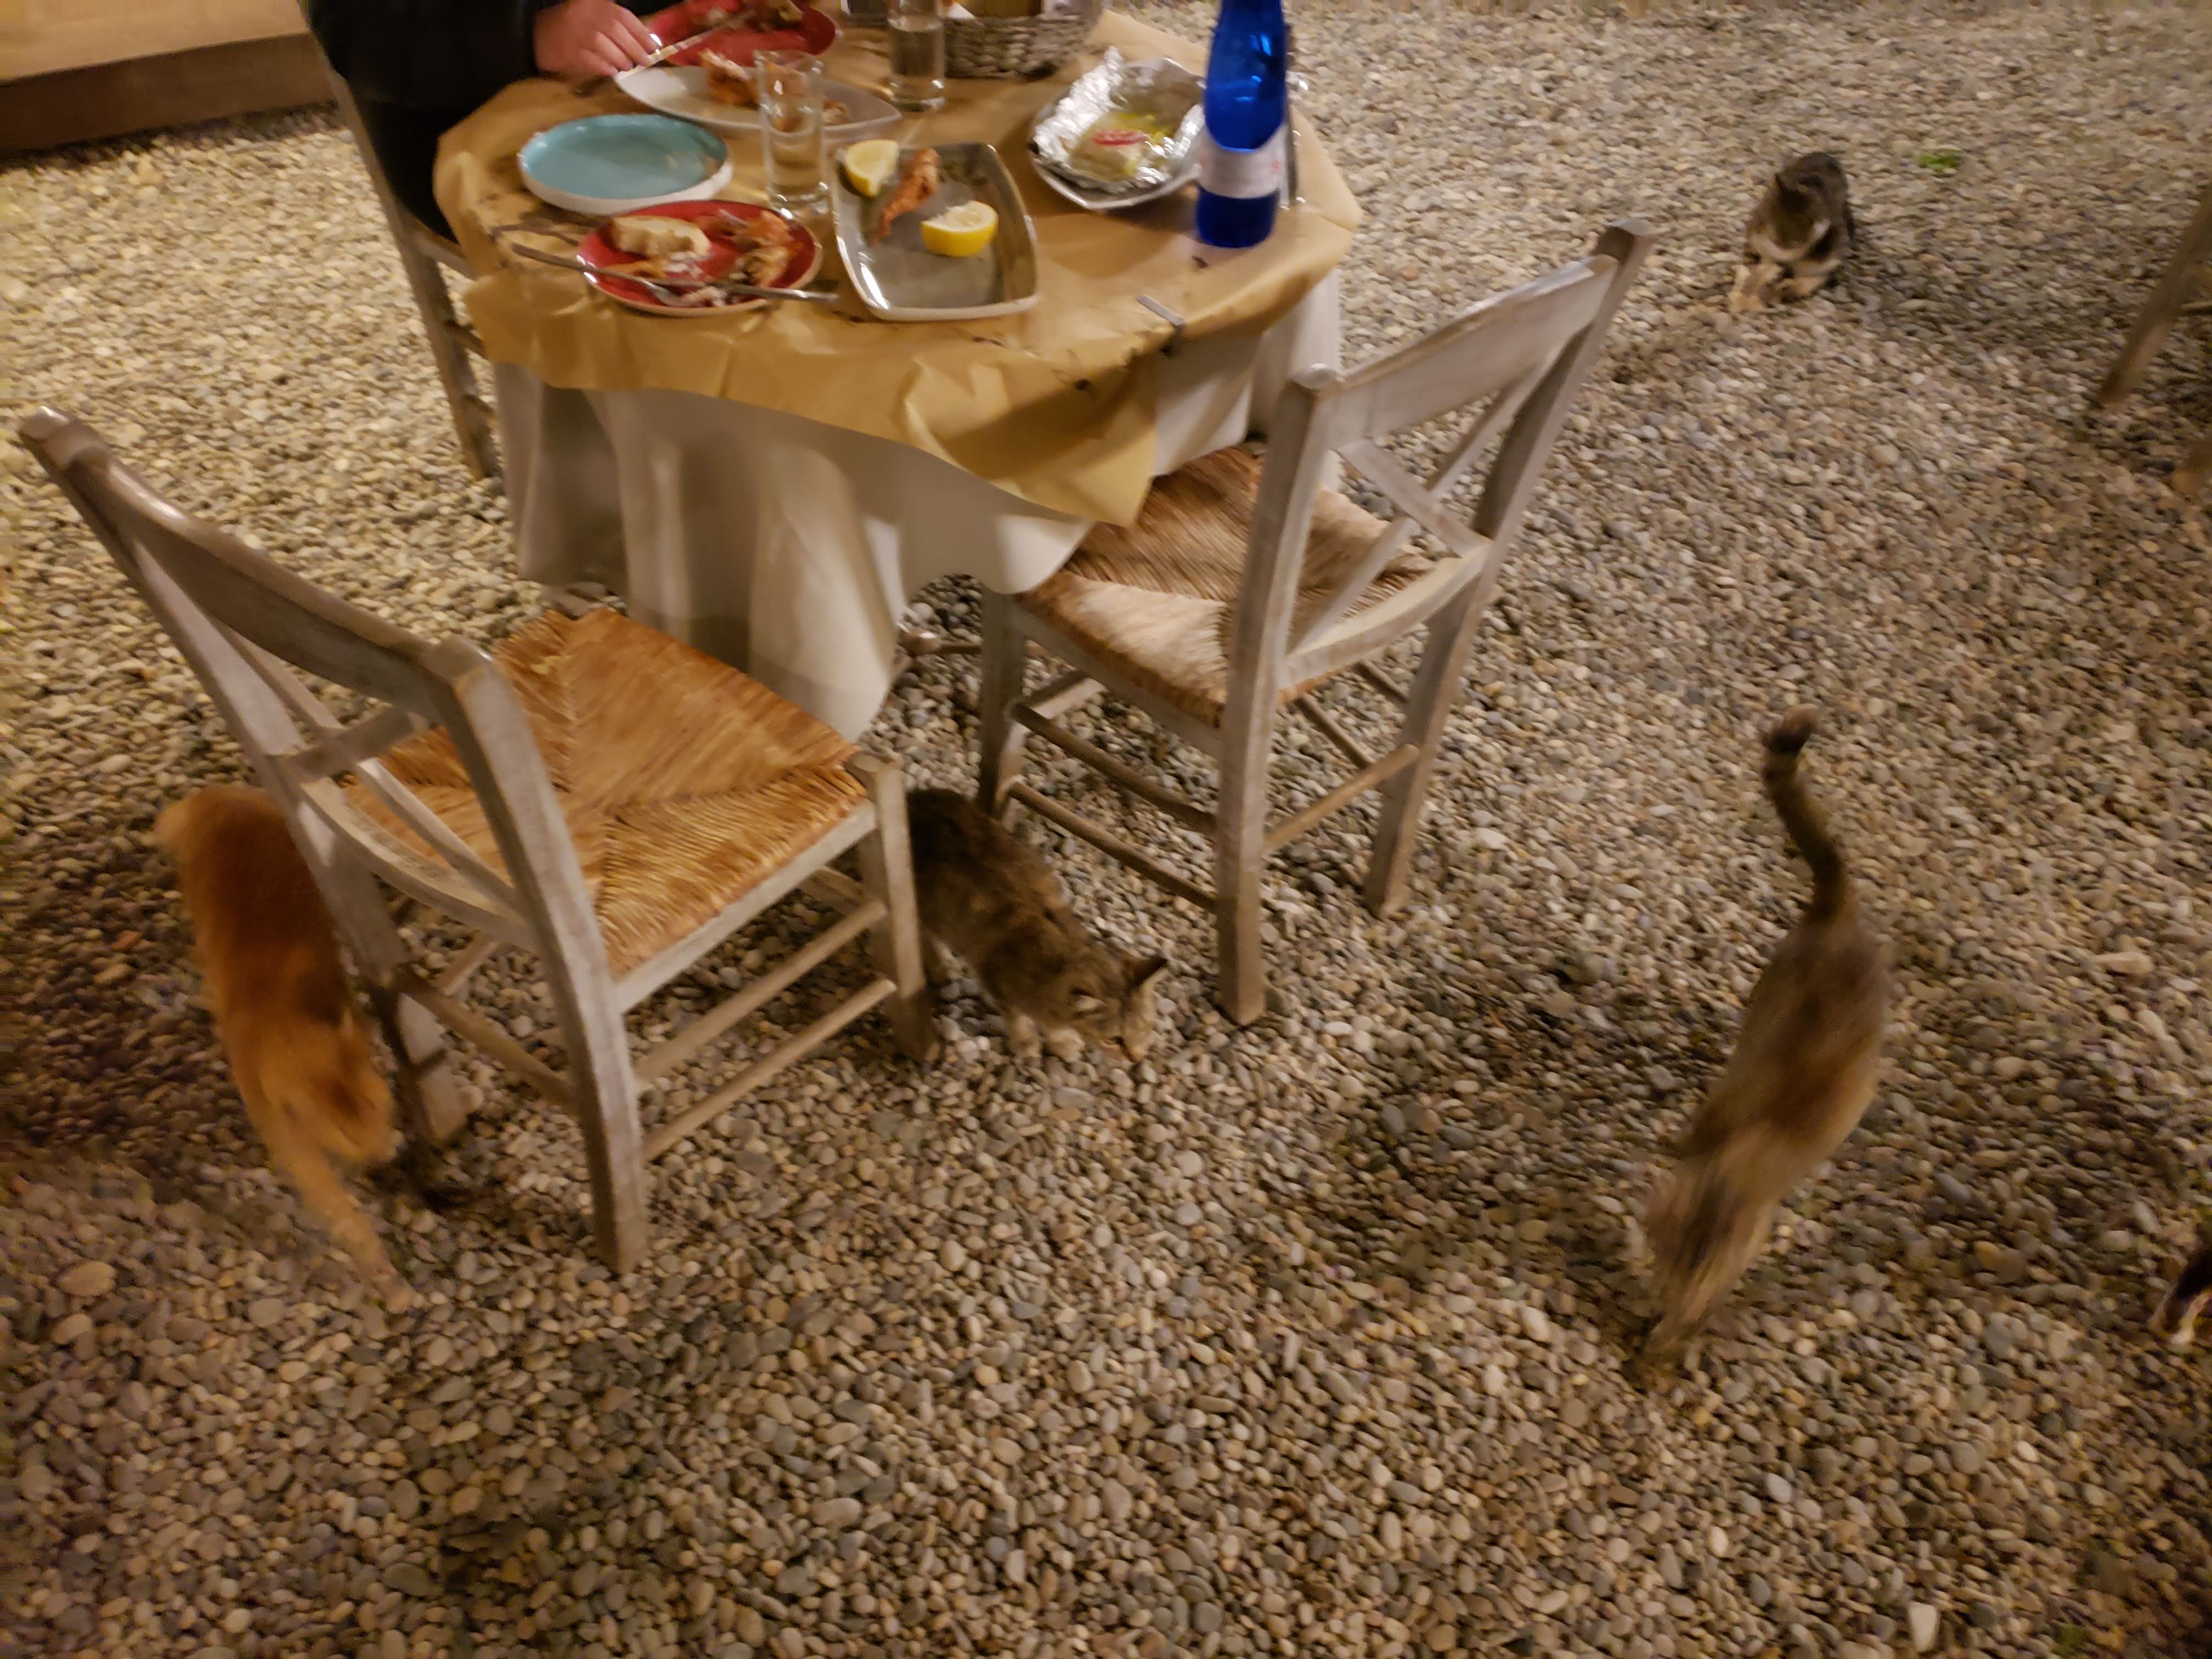 Cats trying to get food